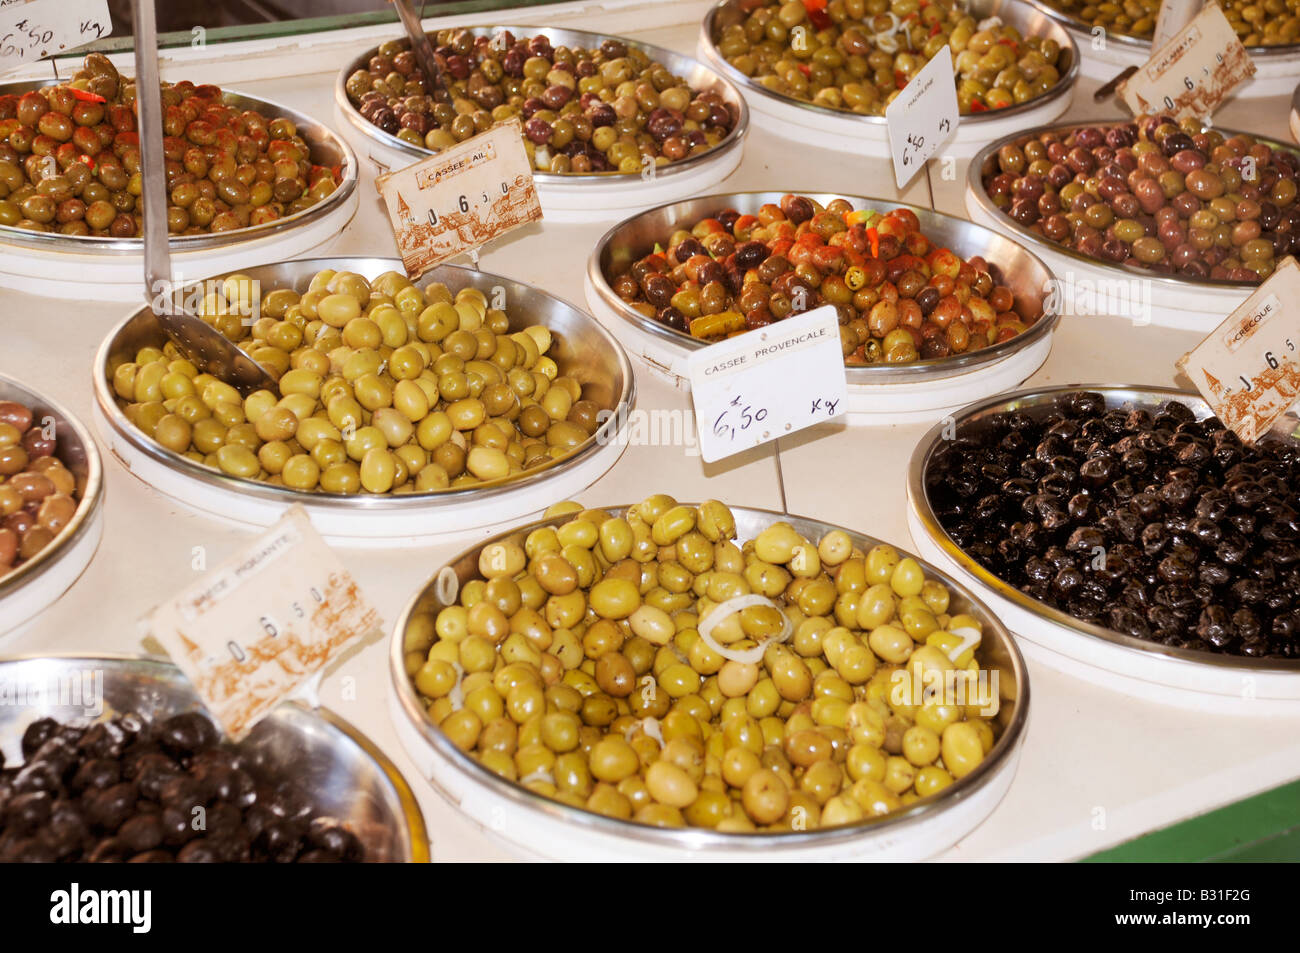 BOWLS OF OLIVES ON MARKET STALL Stock Photo